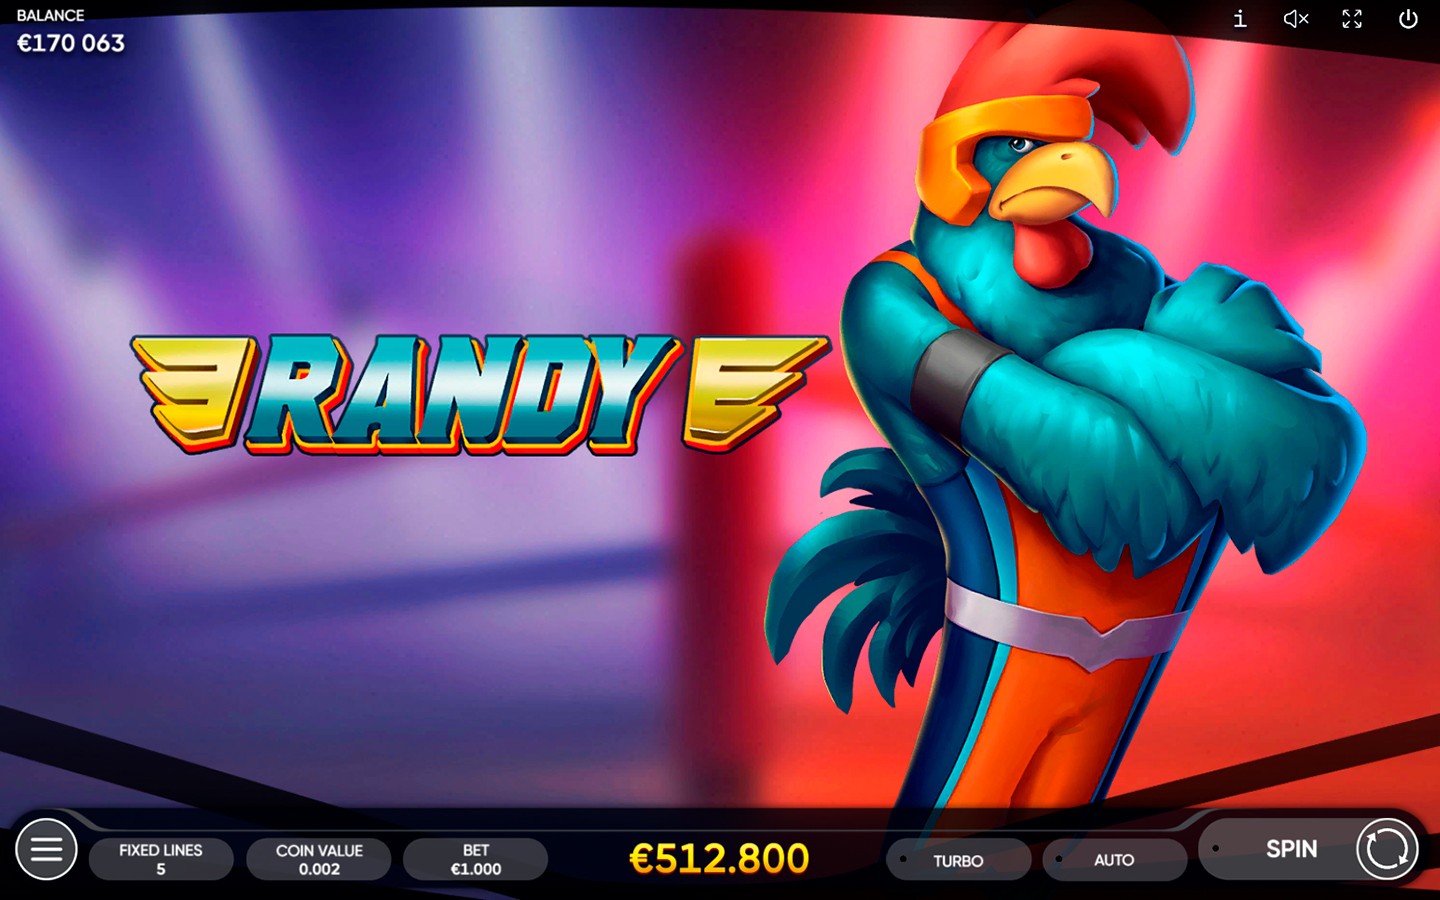 ROOSTER FURY SLOT PAYS OVER 1300x